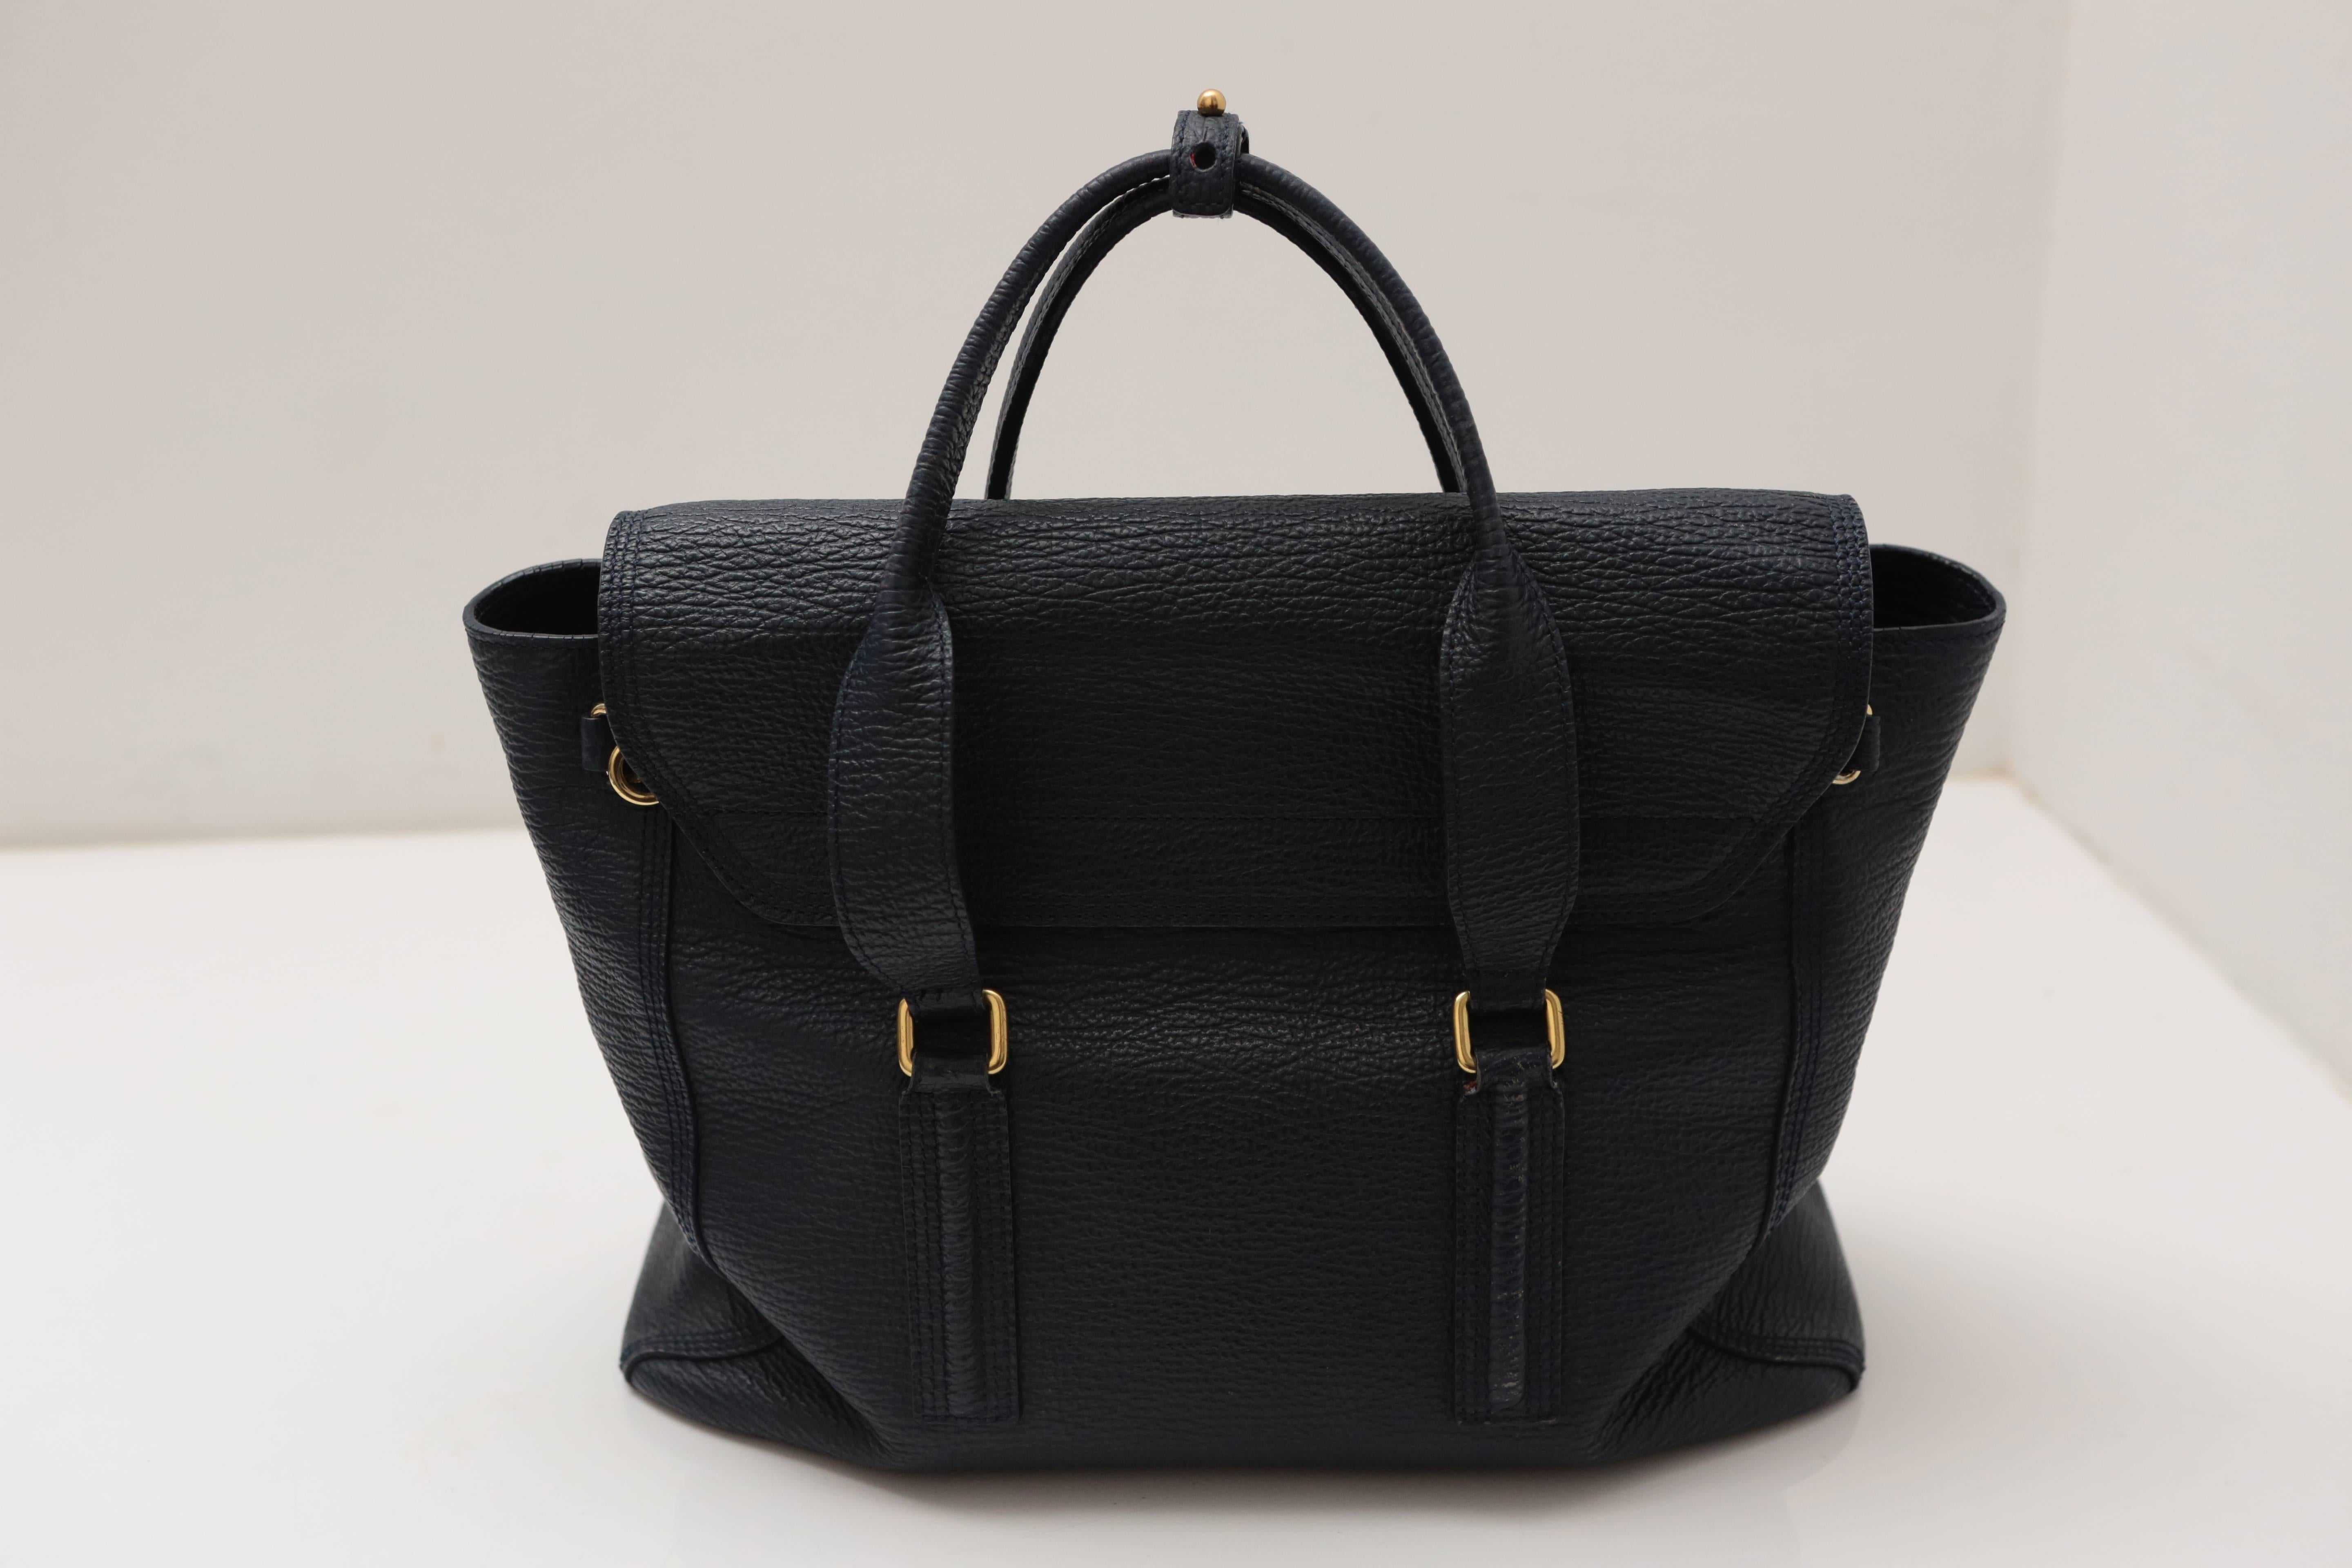 Textured navy leather adorns this medium-sized satchel, featuring a detachable cross-body strap and zipper gussets that open into a fan shape. Gold hardware and a push lock closure complete this staple handbag.